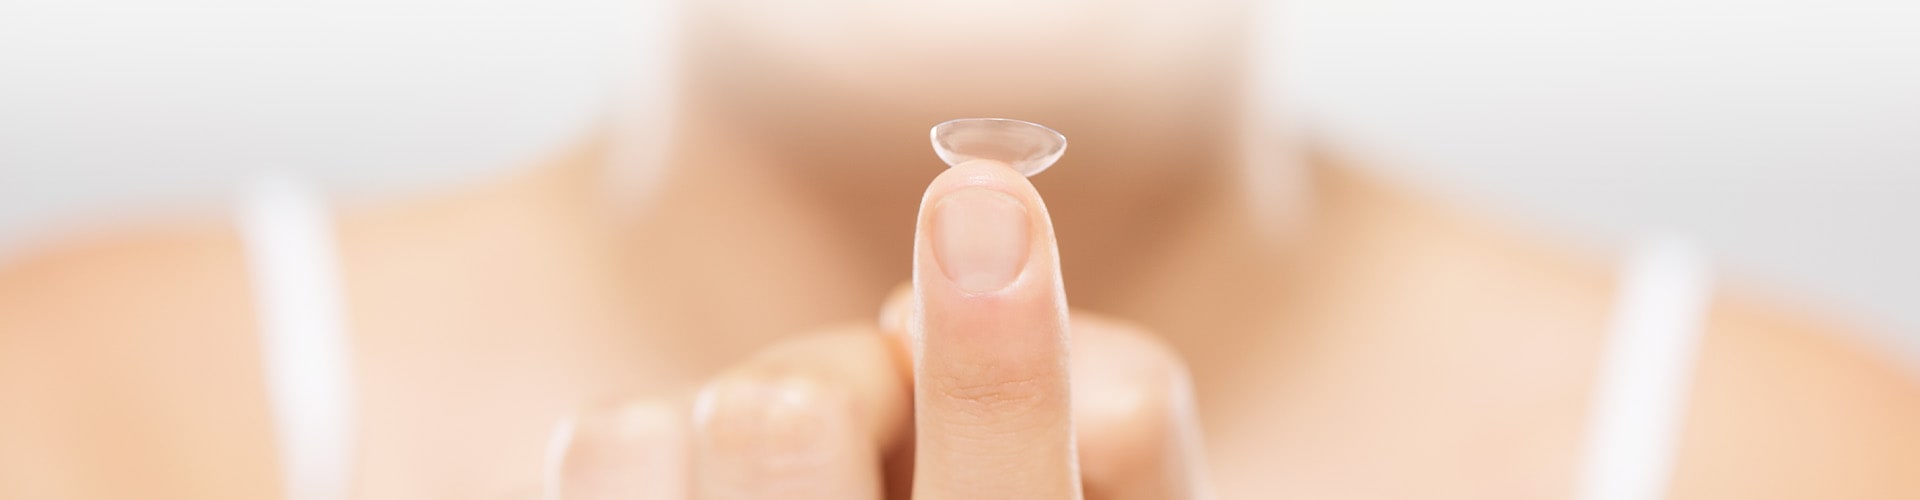 holding contact lens on one finger